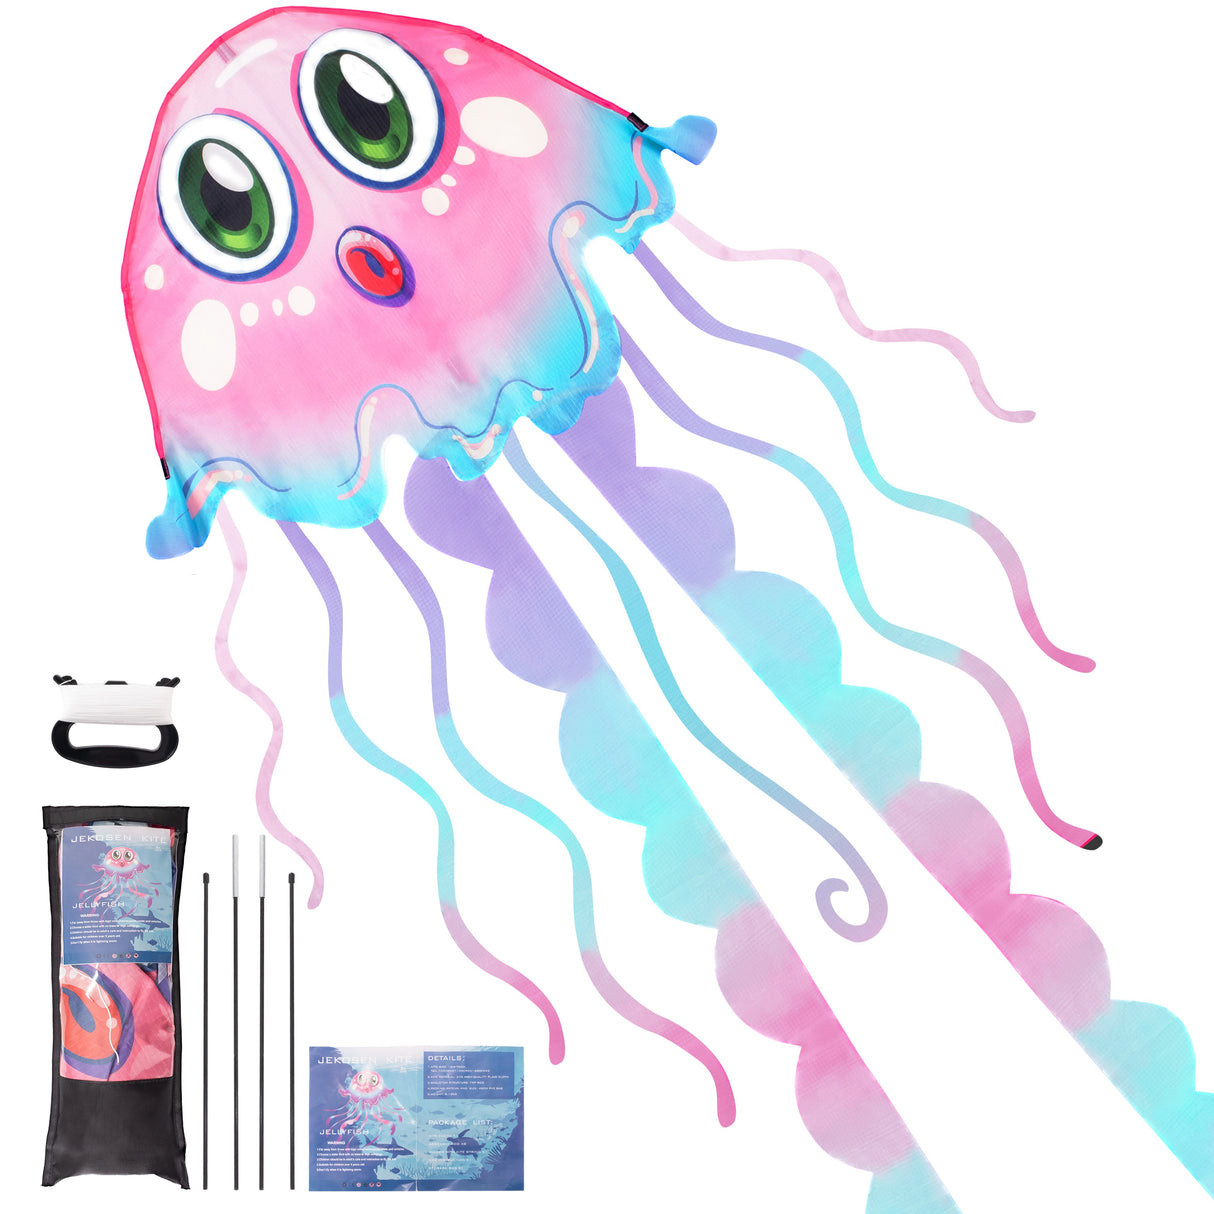 JEKOSEN Large Jellyfish Kite Easy to Fly Single String Suitable for Kids Toddlers Adults Beach Park Outdoor Activities - GexWorldwide